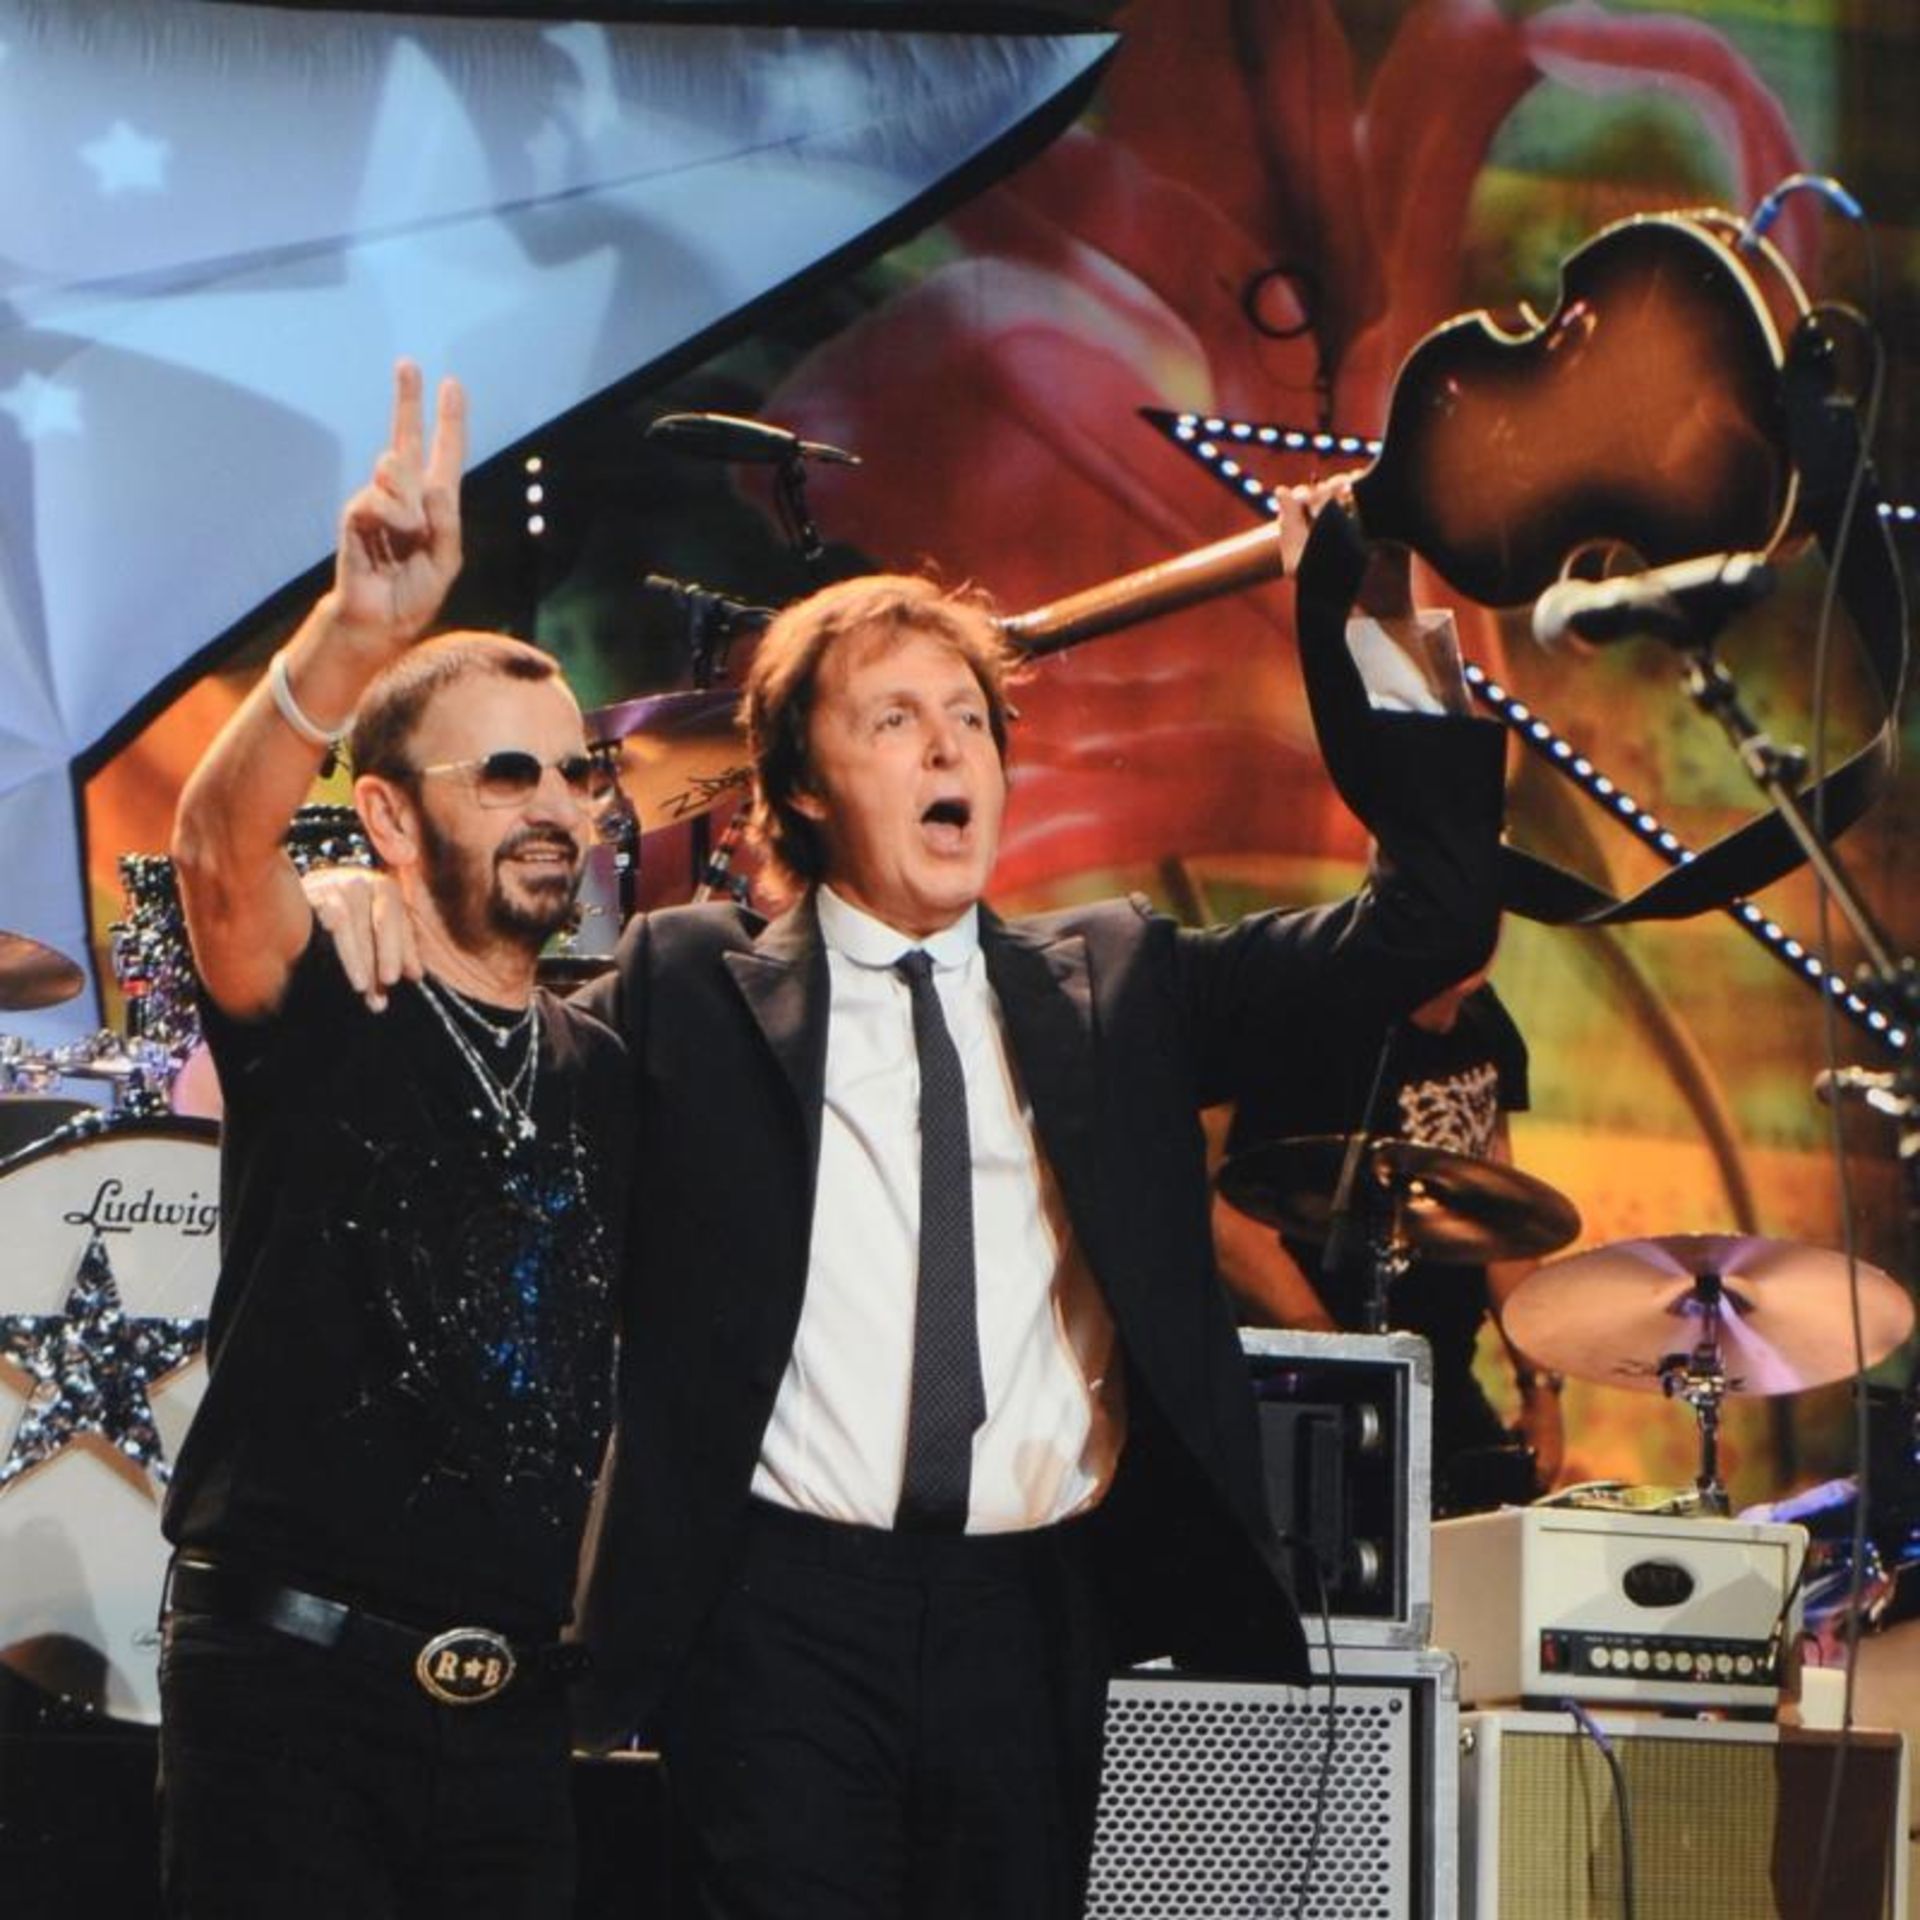 Rob Shanahan, "Ringo Starr & Paul McCartney" Hand Signed Limited Edition Giclee - Image 2 of 2